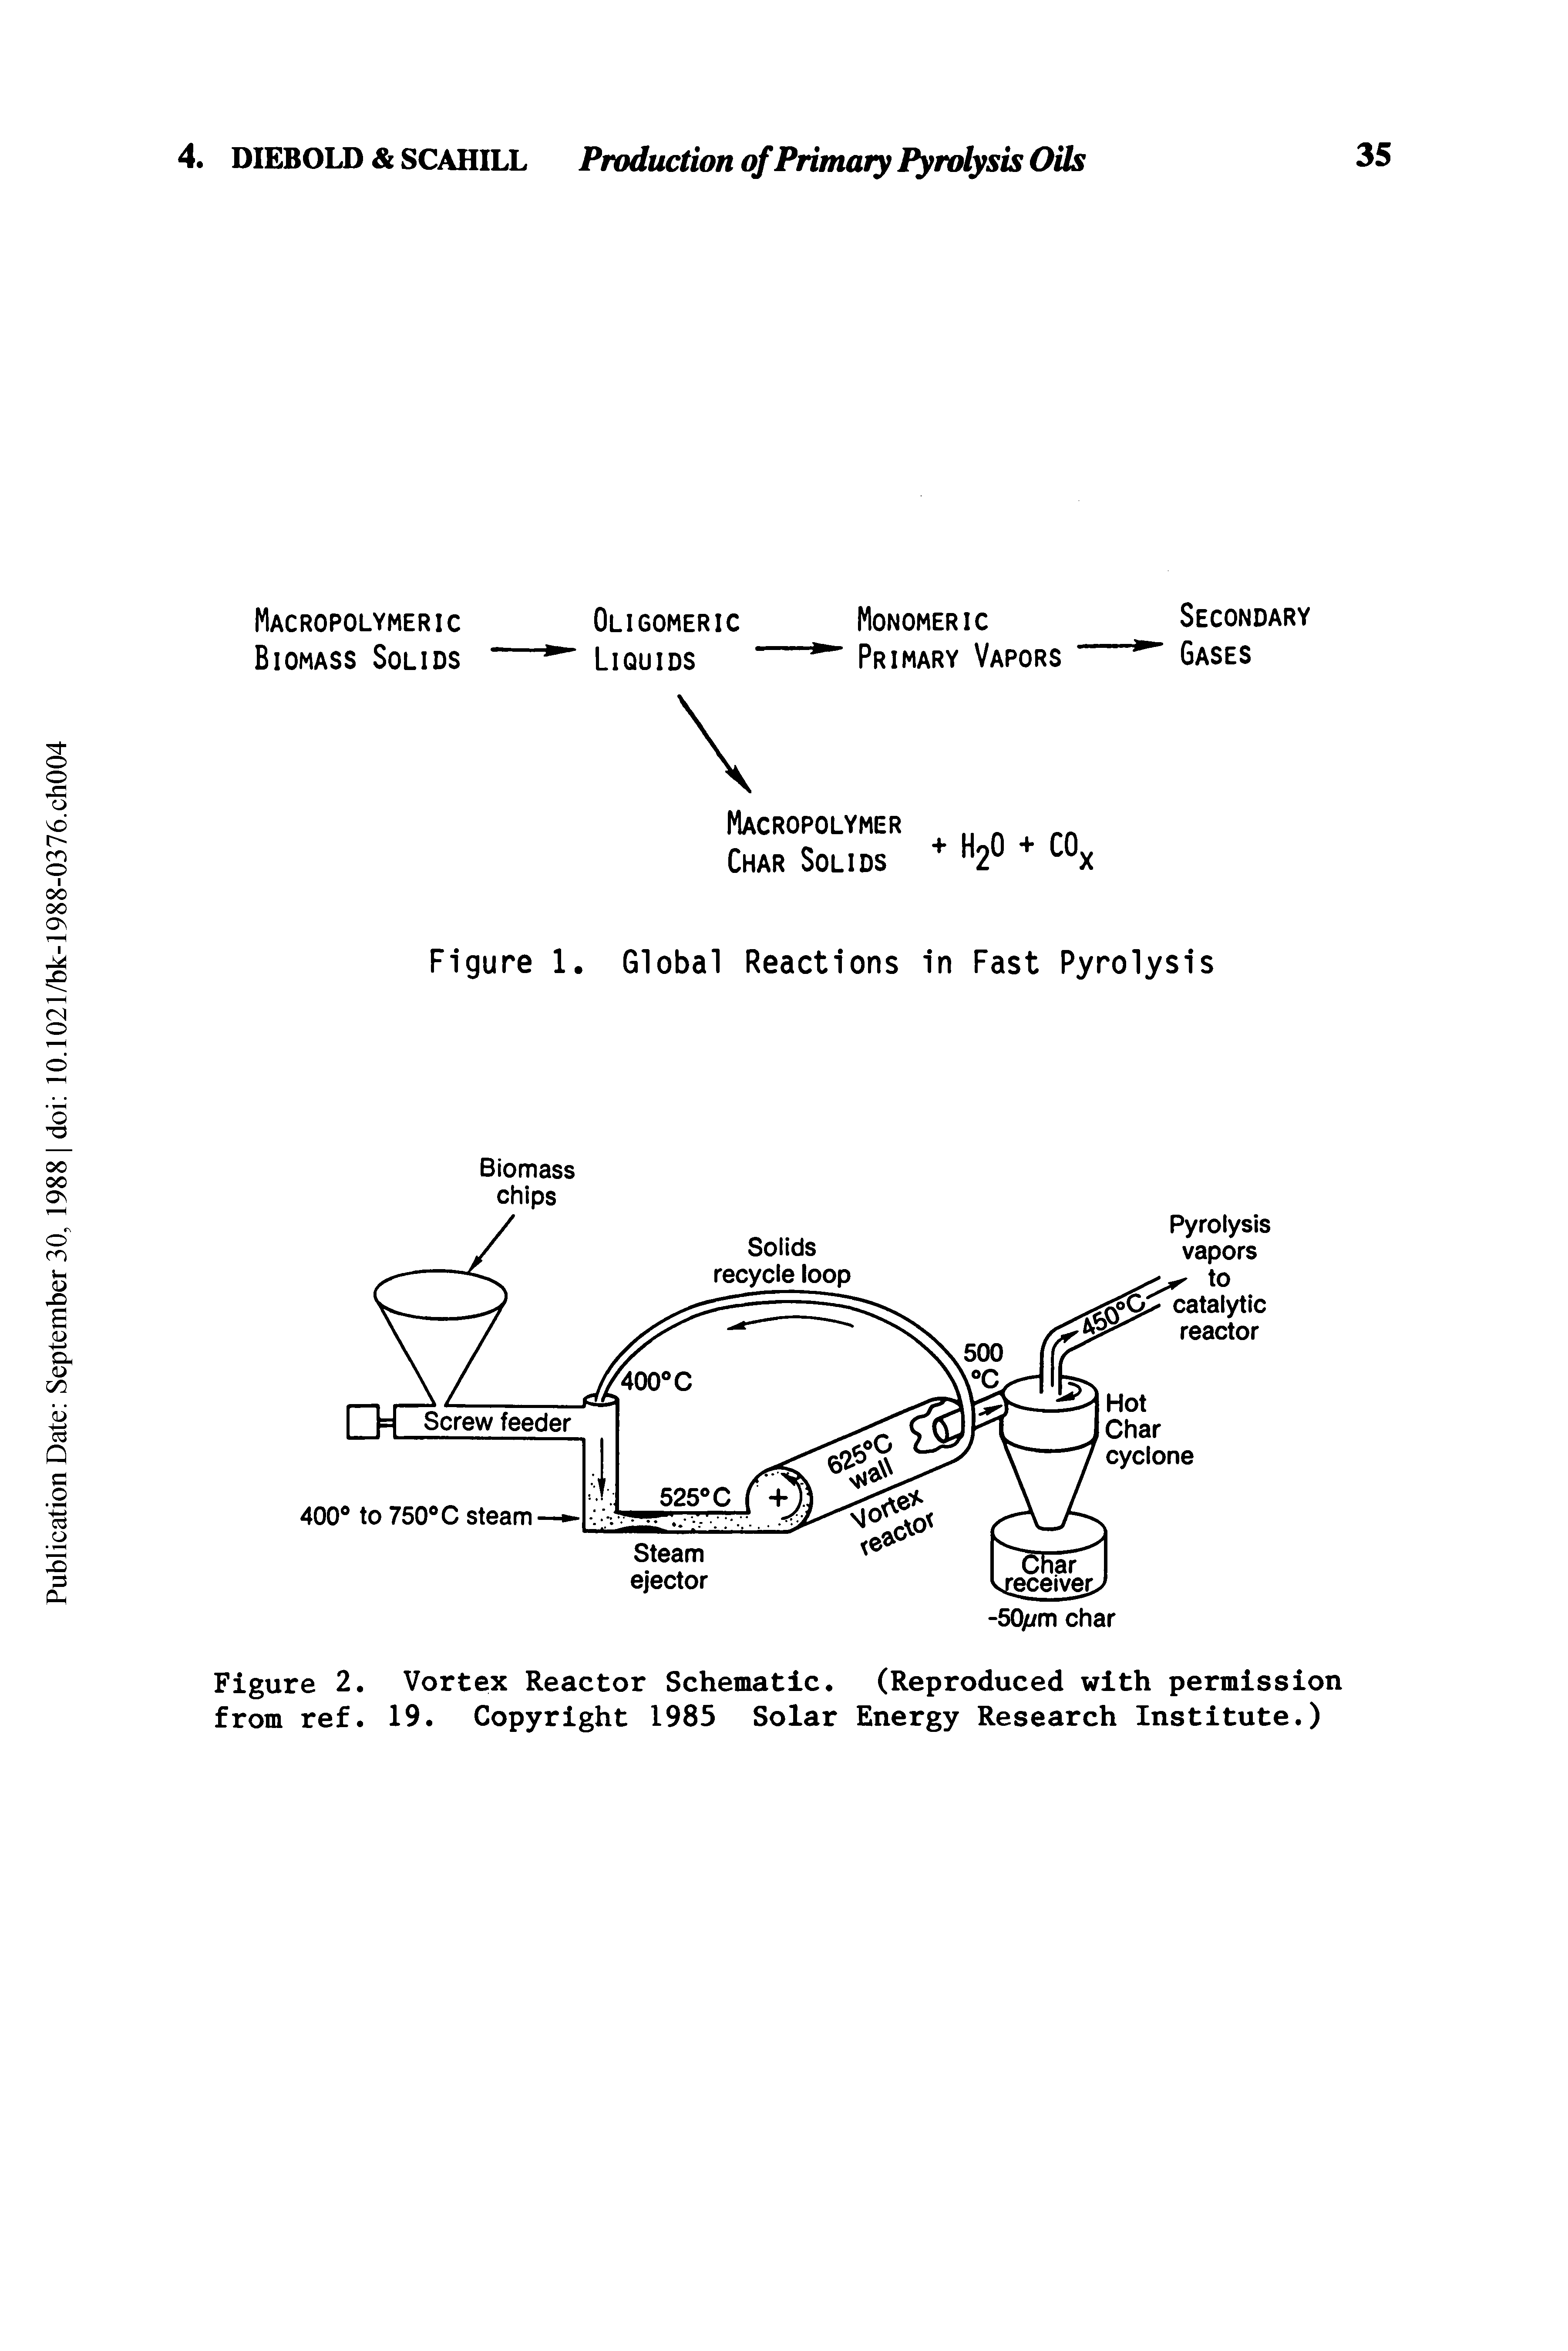 Figure 2. Vortex Reactor Schematic. (Reproduced with permission from ref. 19. Copyright 1985 Solar Energy Research Institute.)...